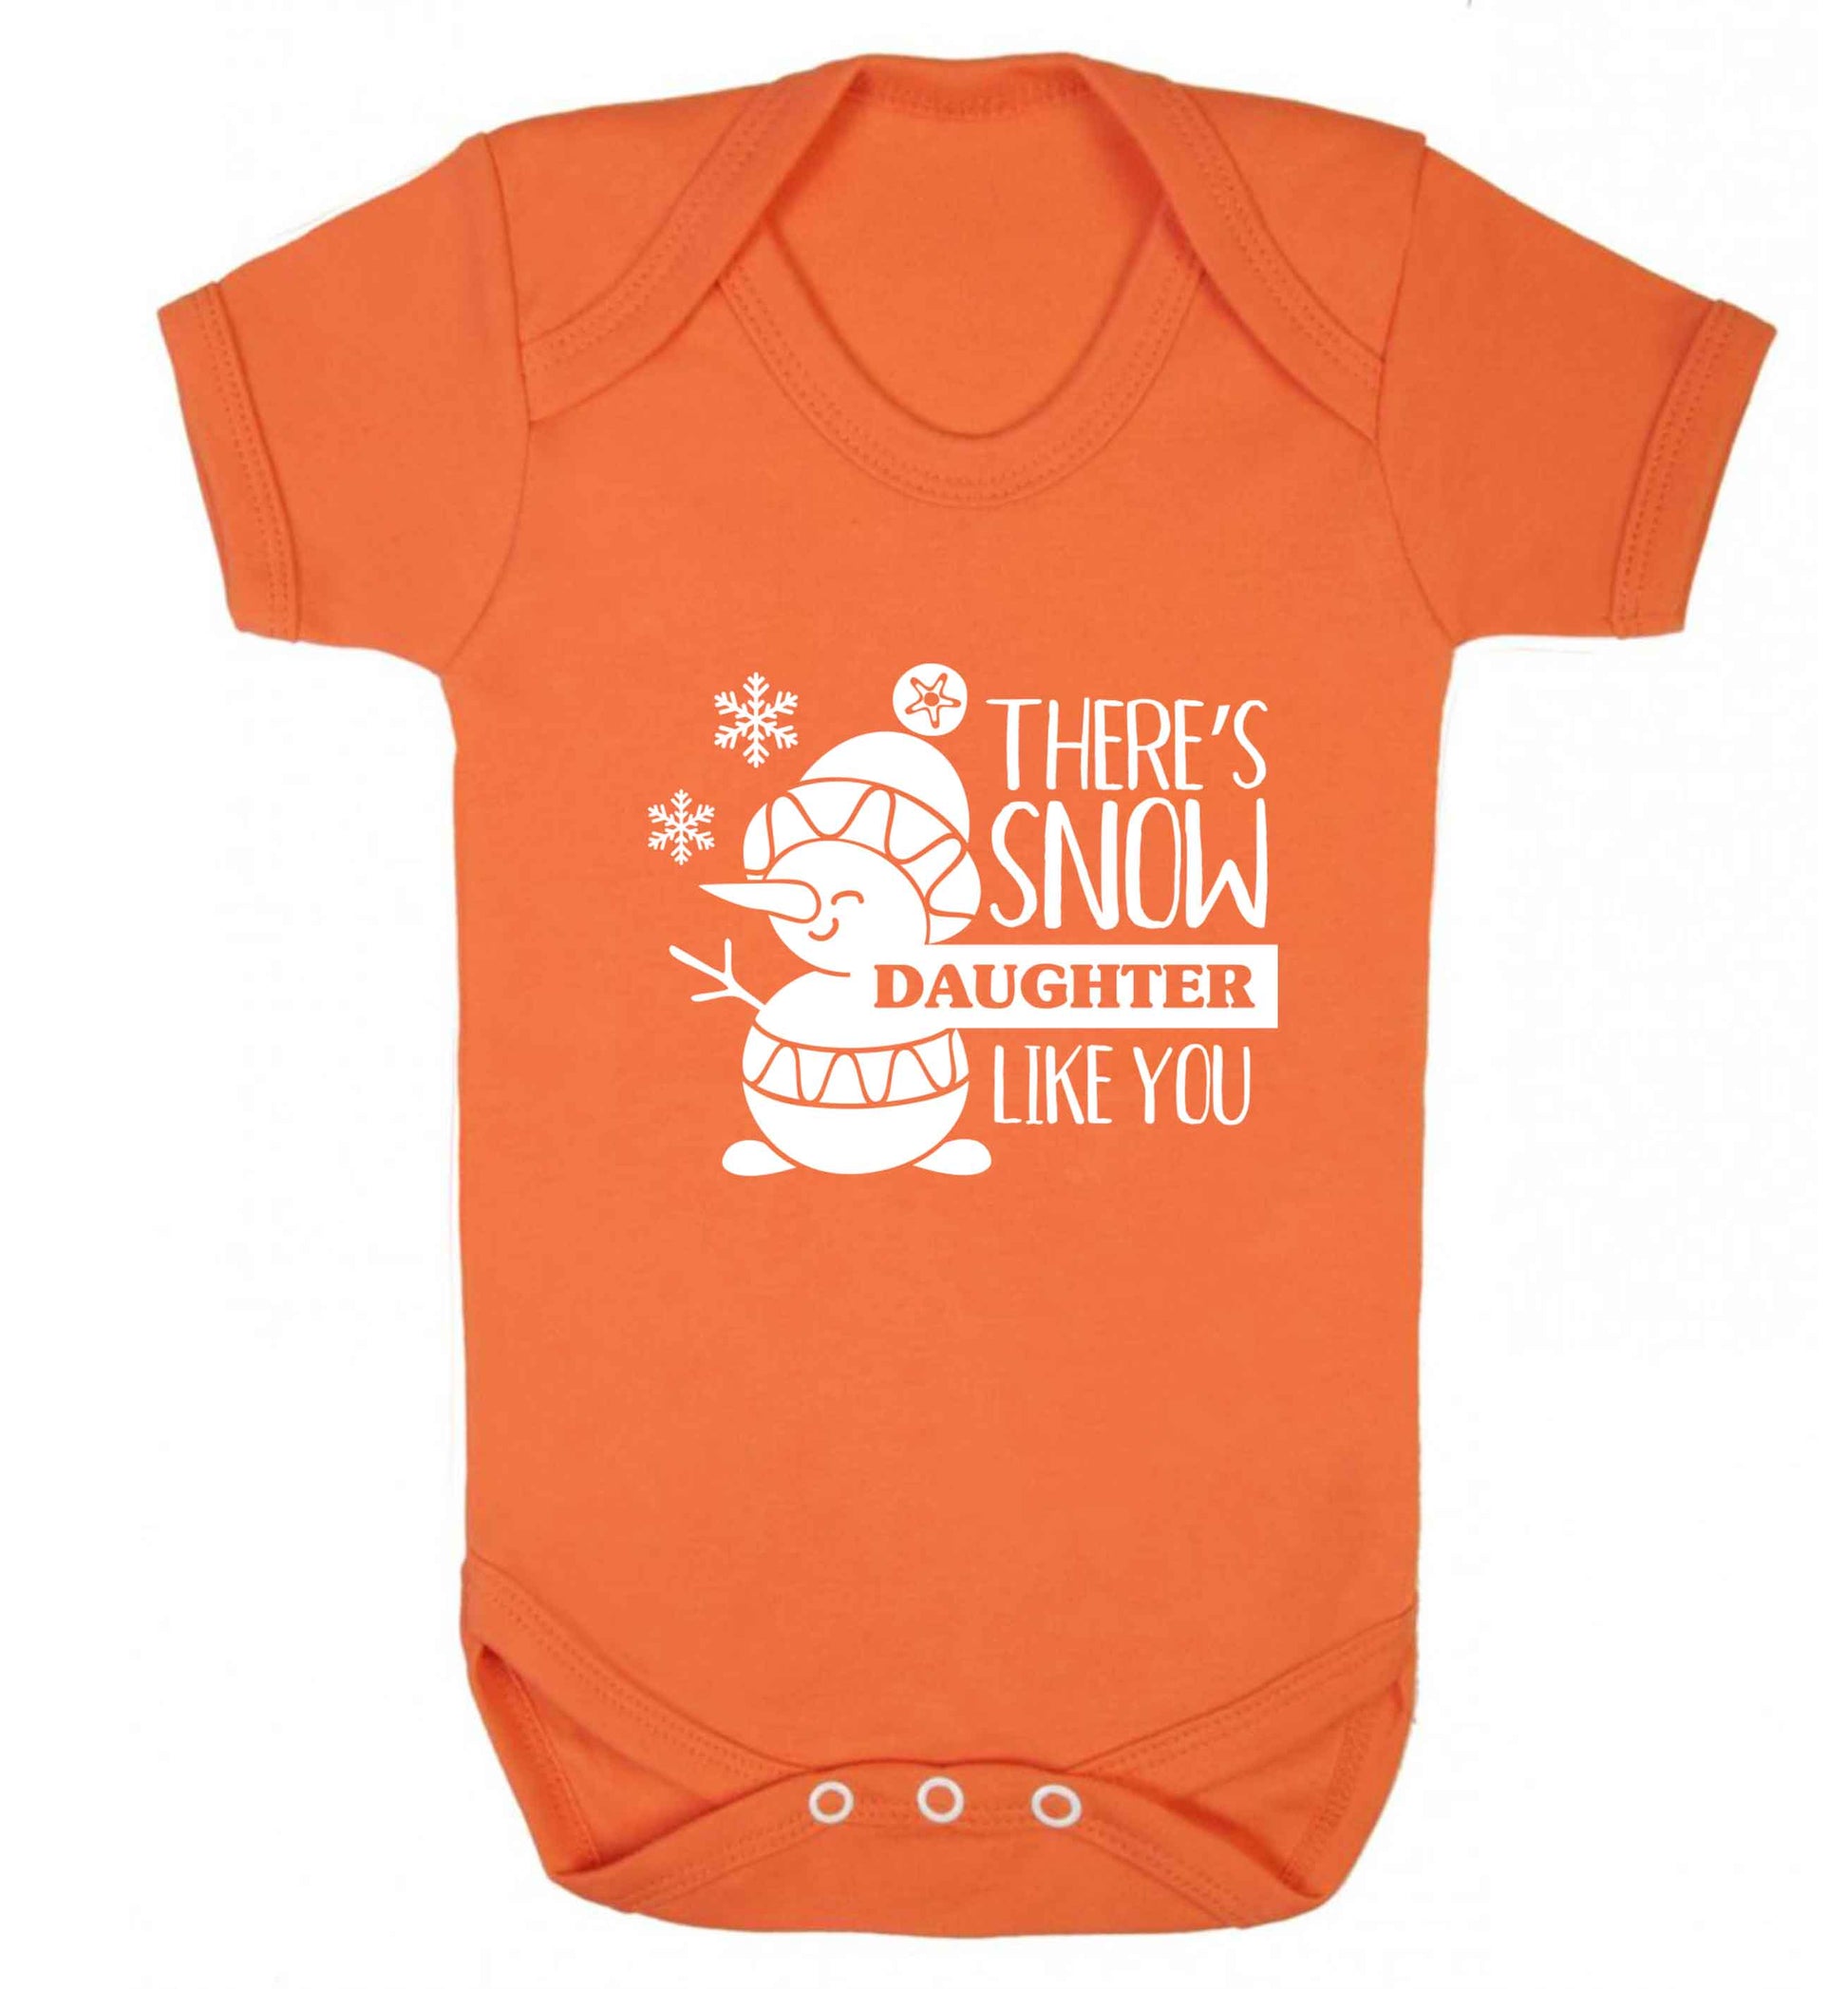 There's snow daughter like you baby vest orange 18-24 months